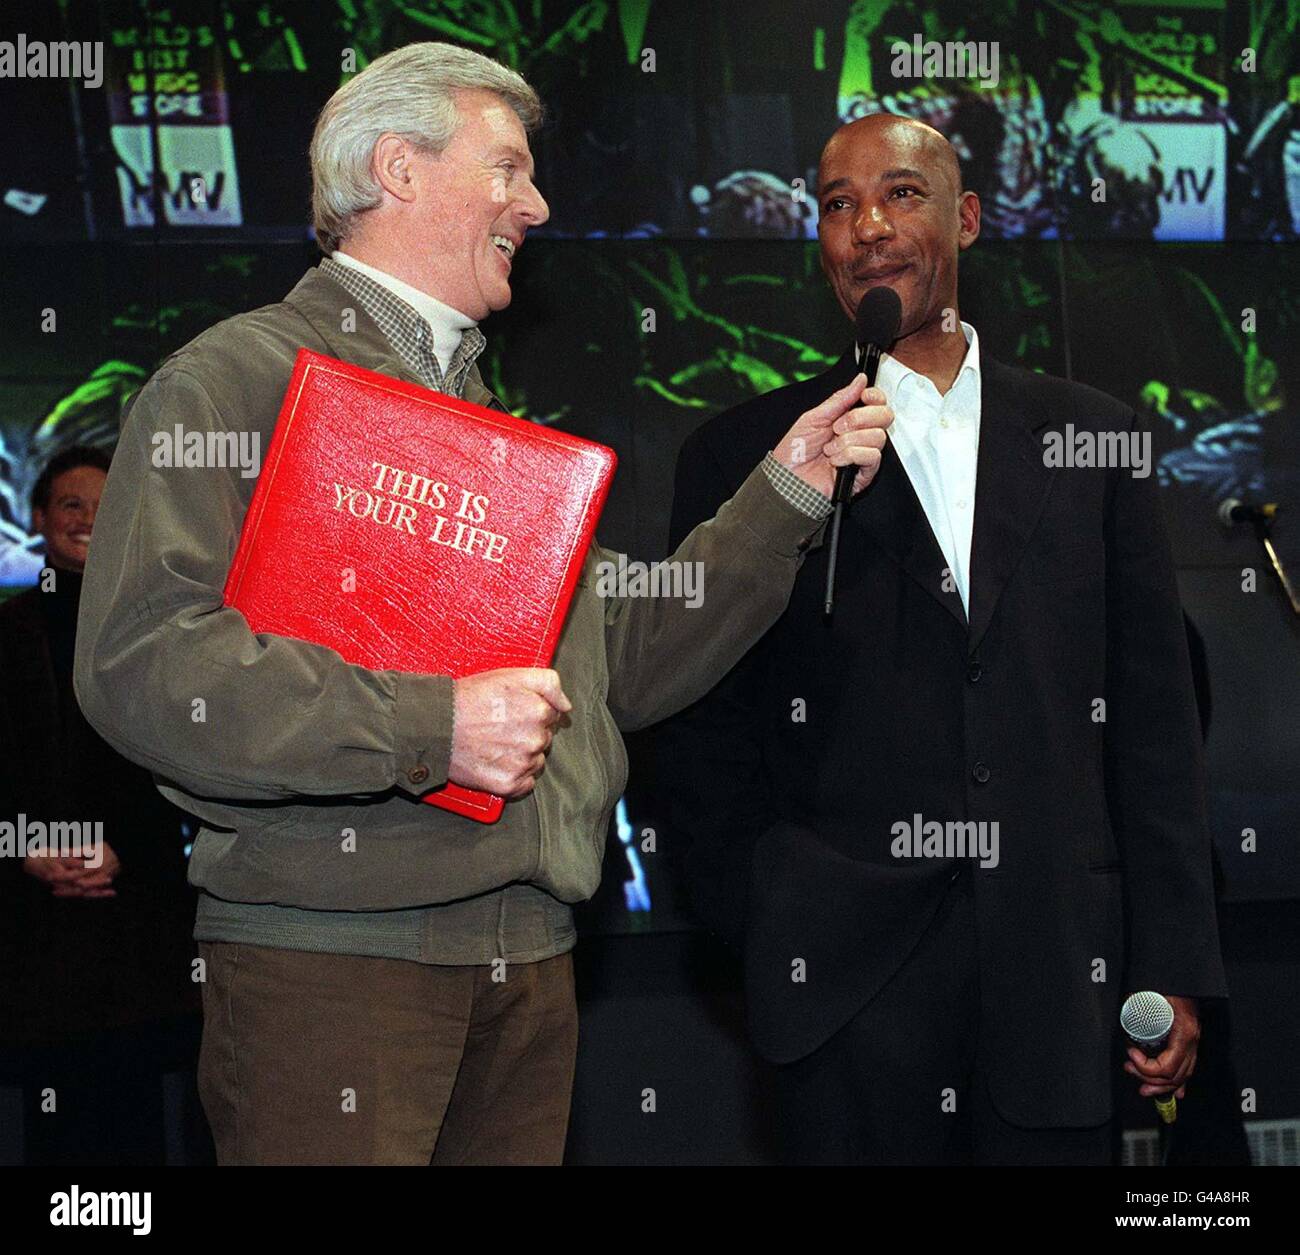 This is Your Life presenter Michael Aspel (left) presents Hot Chocolate singer Errol Brown with the Big Red Book at London's HMV Store in Oxford Street. 21/10/03: It has been announced the TV show This Is Your Life has been axed after almost 50 years.The first episode of the show was broadcast in 1955 and was presented by Eamonn Andrews, but the classic programme is now hosted by Michael Aspel.In its heyday the show regularly pulled in 20 million viewers. But the last edition of the programme in August this year, featuring former choirboy Aled Jones, was watched by just 3.5 million. Stock Photo